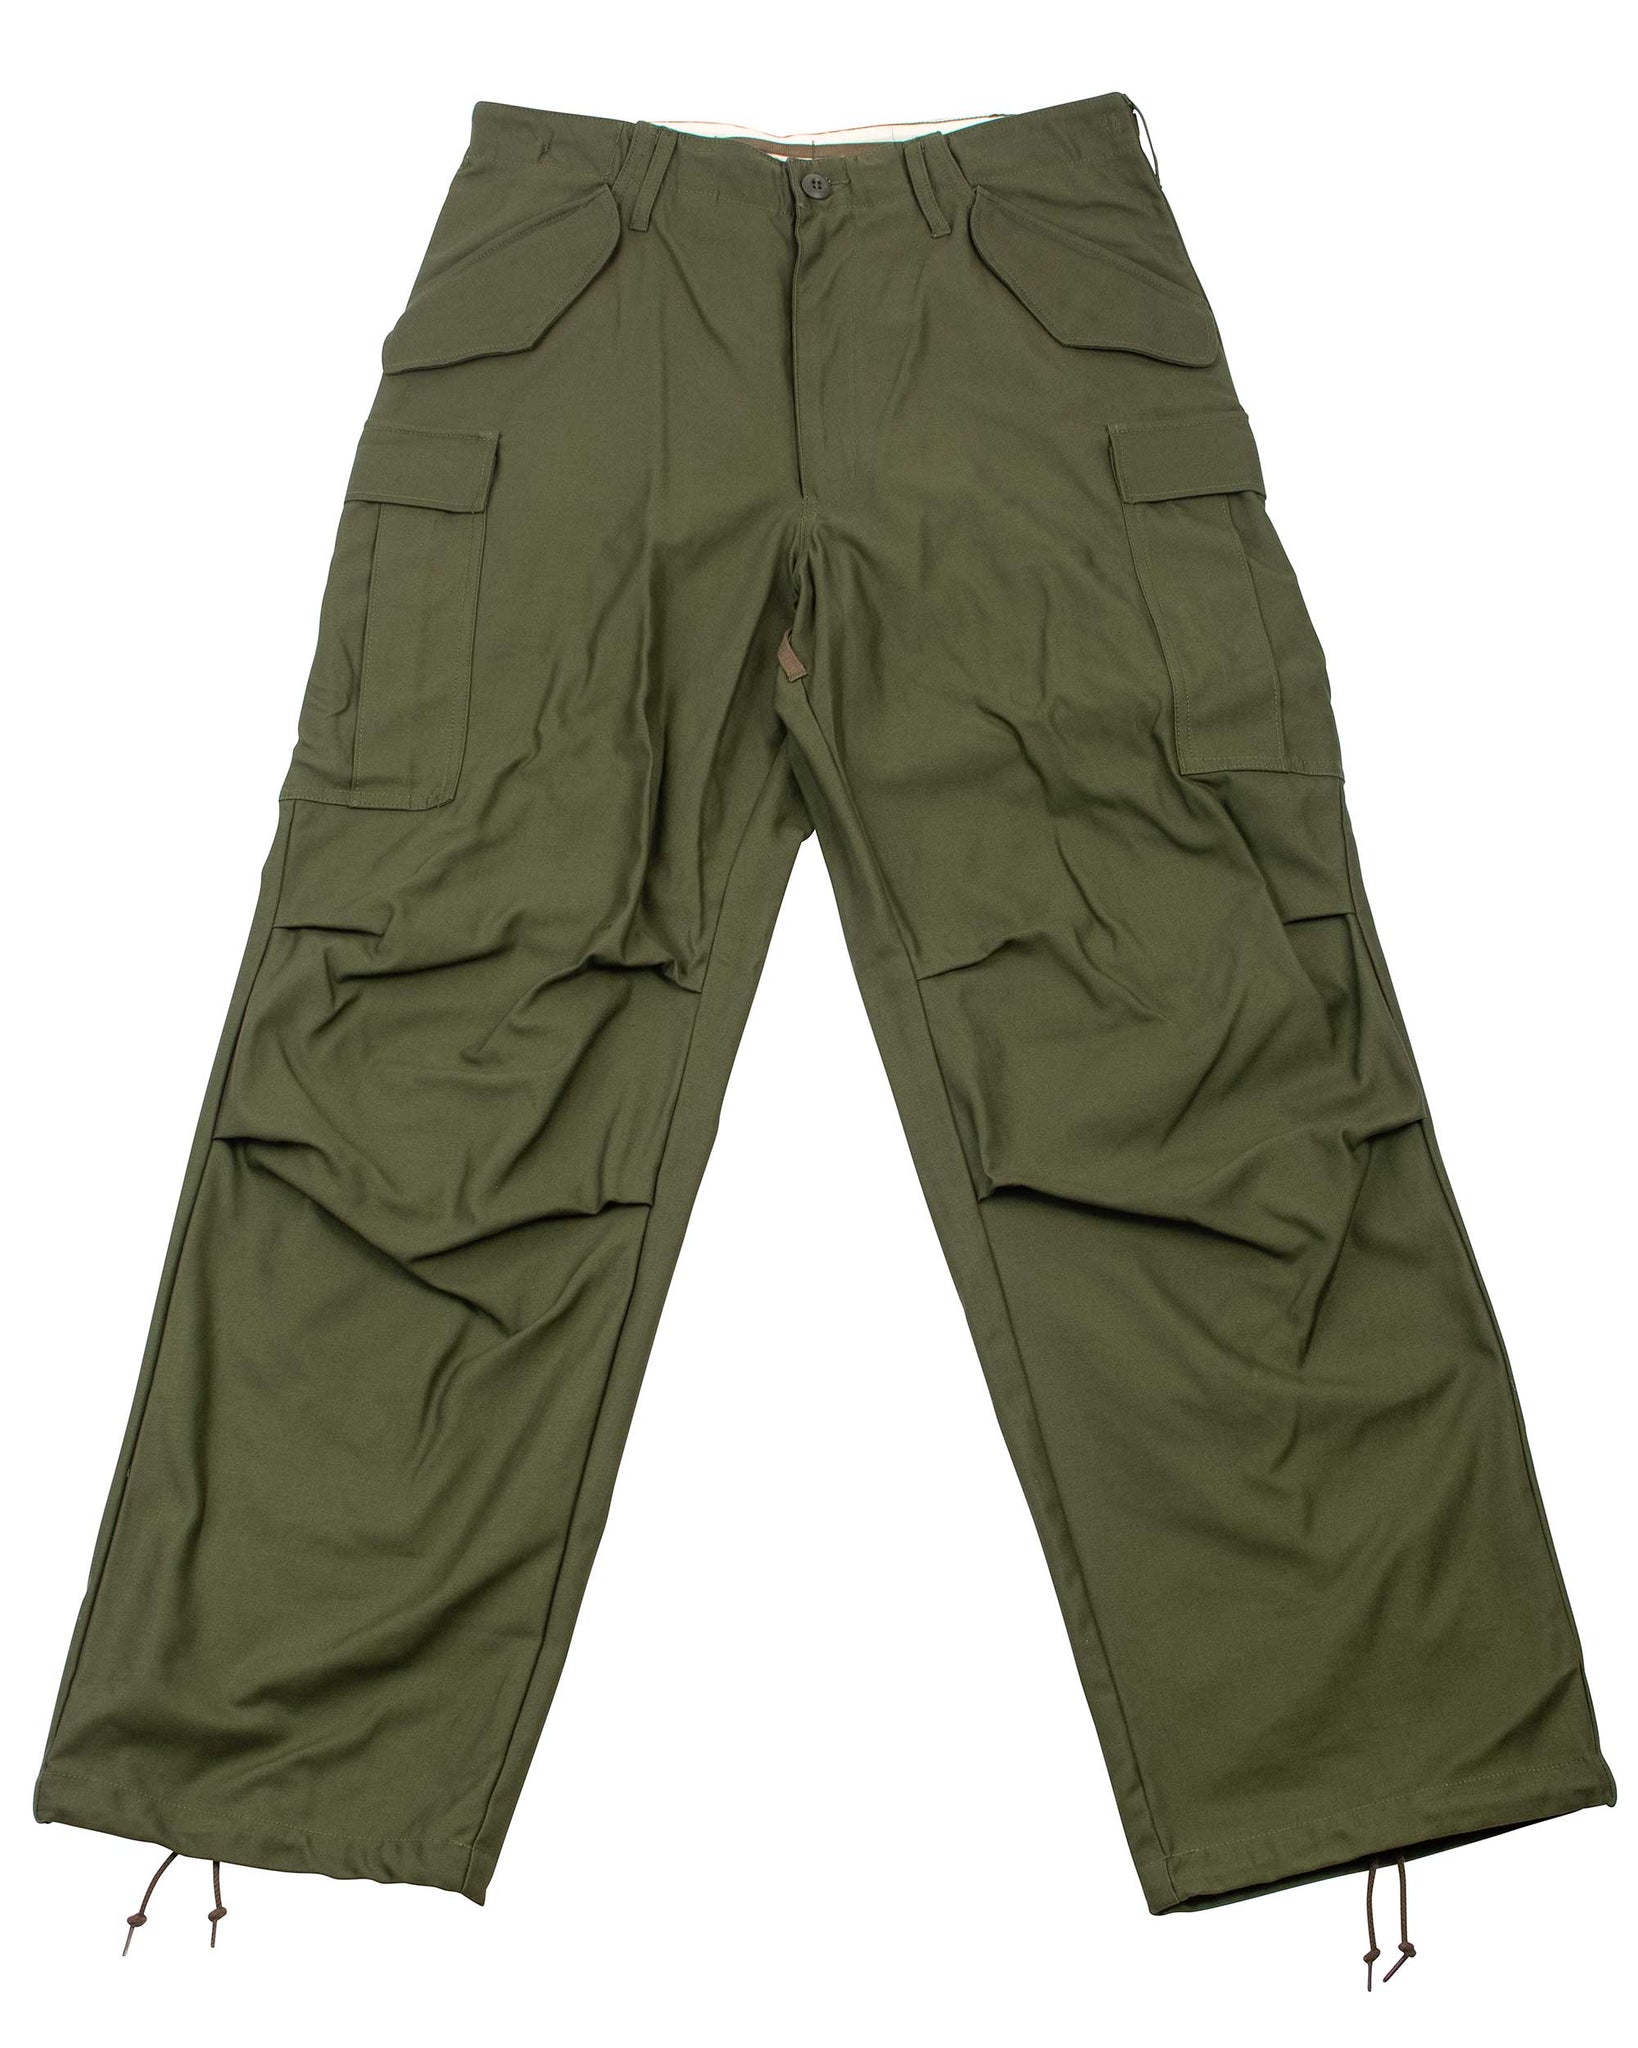 The Real McCoy's MP20005 M-65 Field Trousers OG107